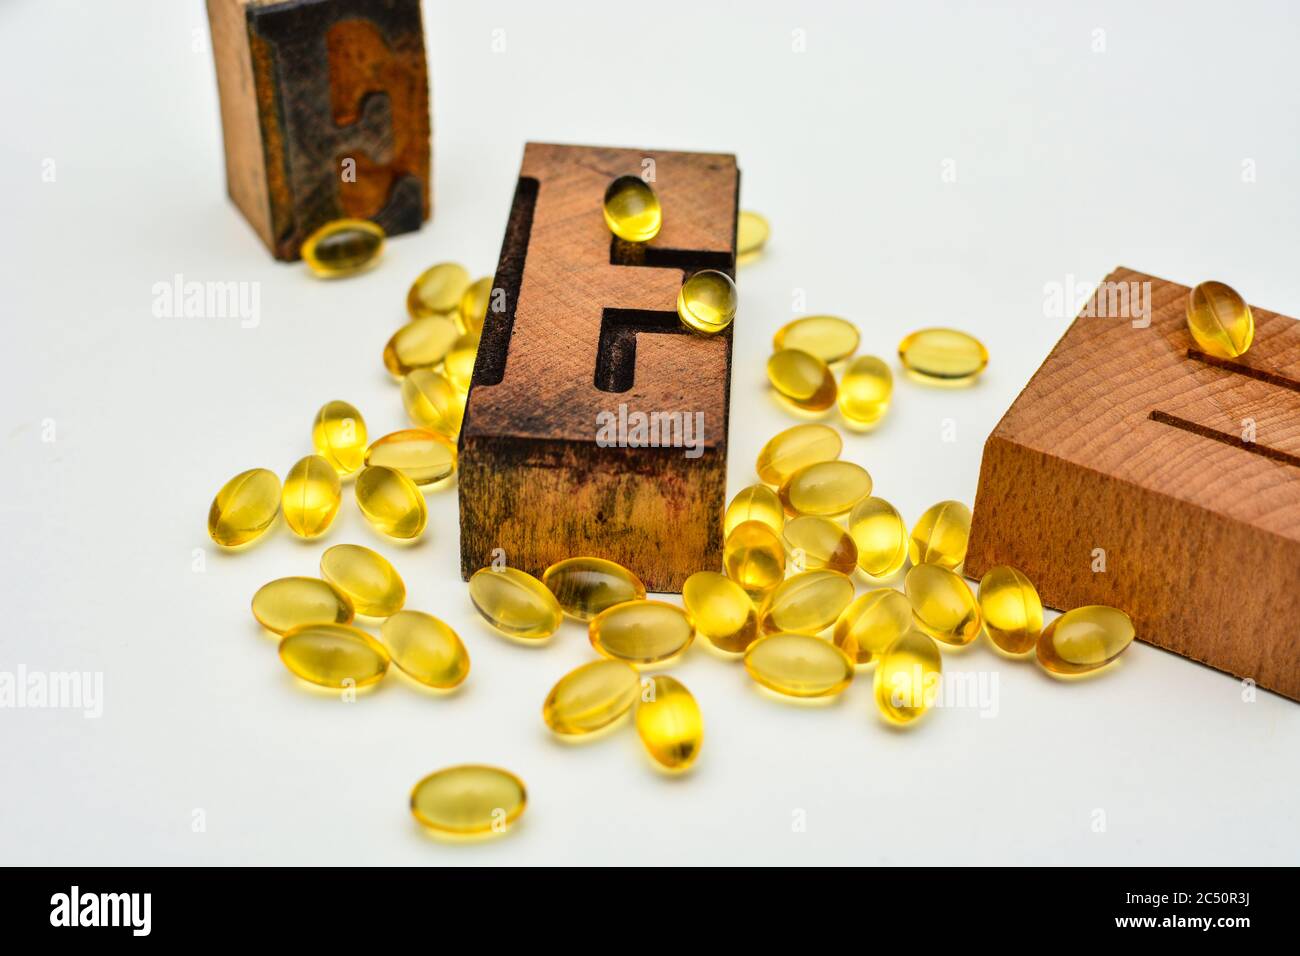 Vitamin E soft gel capsules and wooden typographic letters E. Healthcare and immunity support concept. Stock Photo